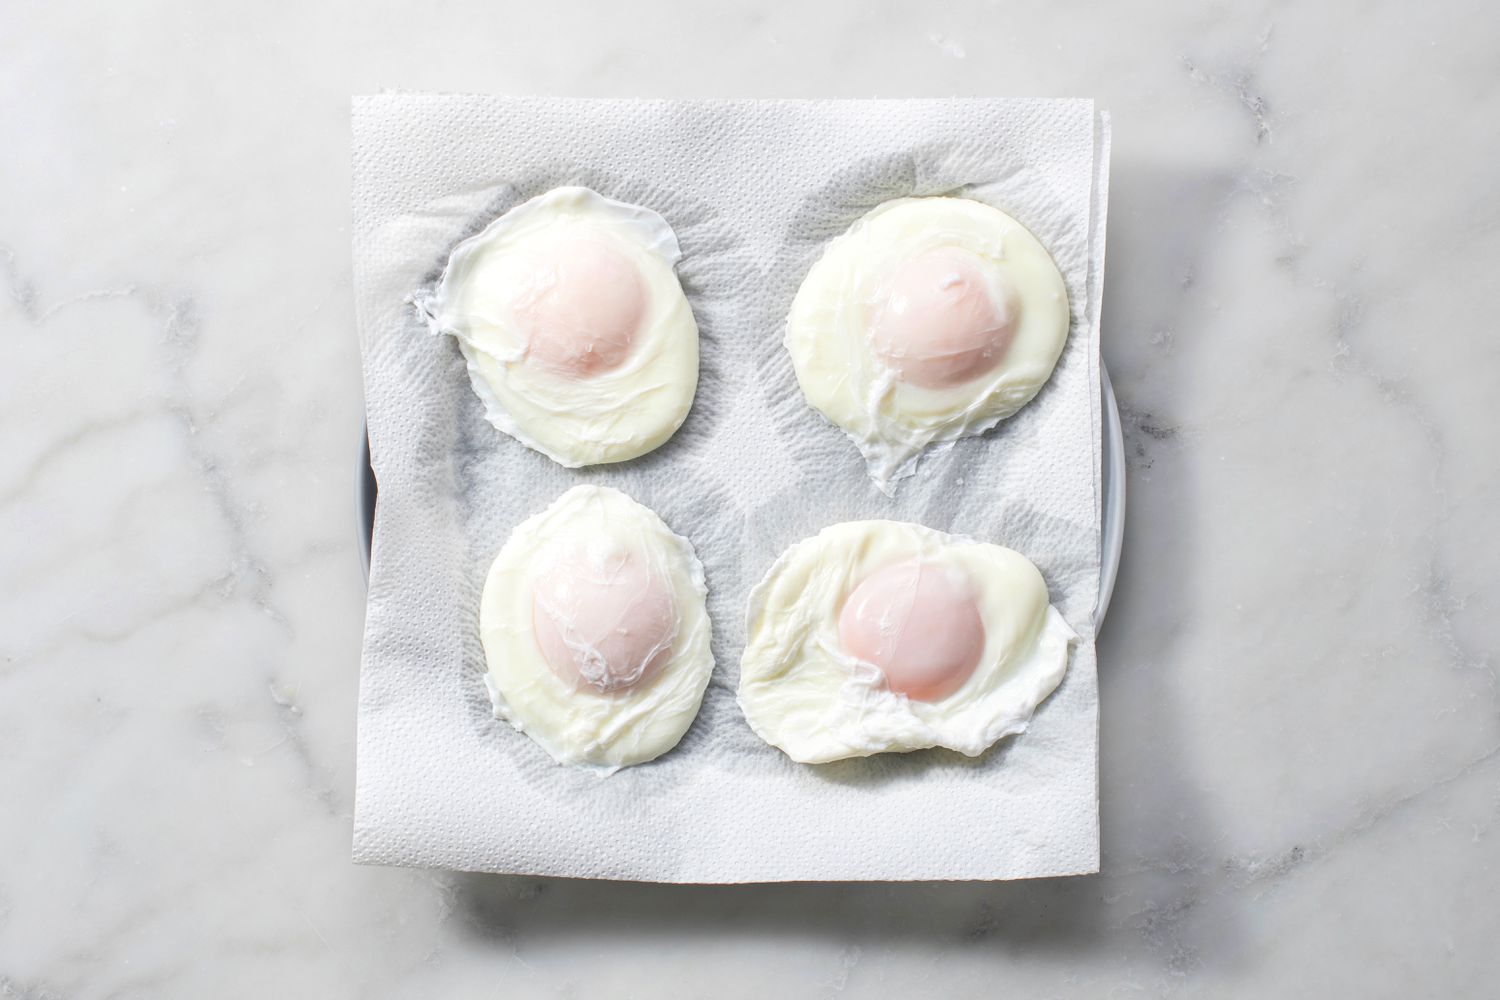 Poached eggs resting on a paper towel